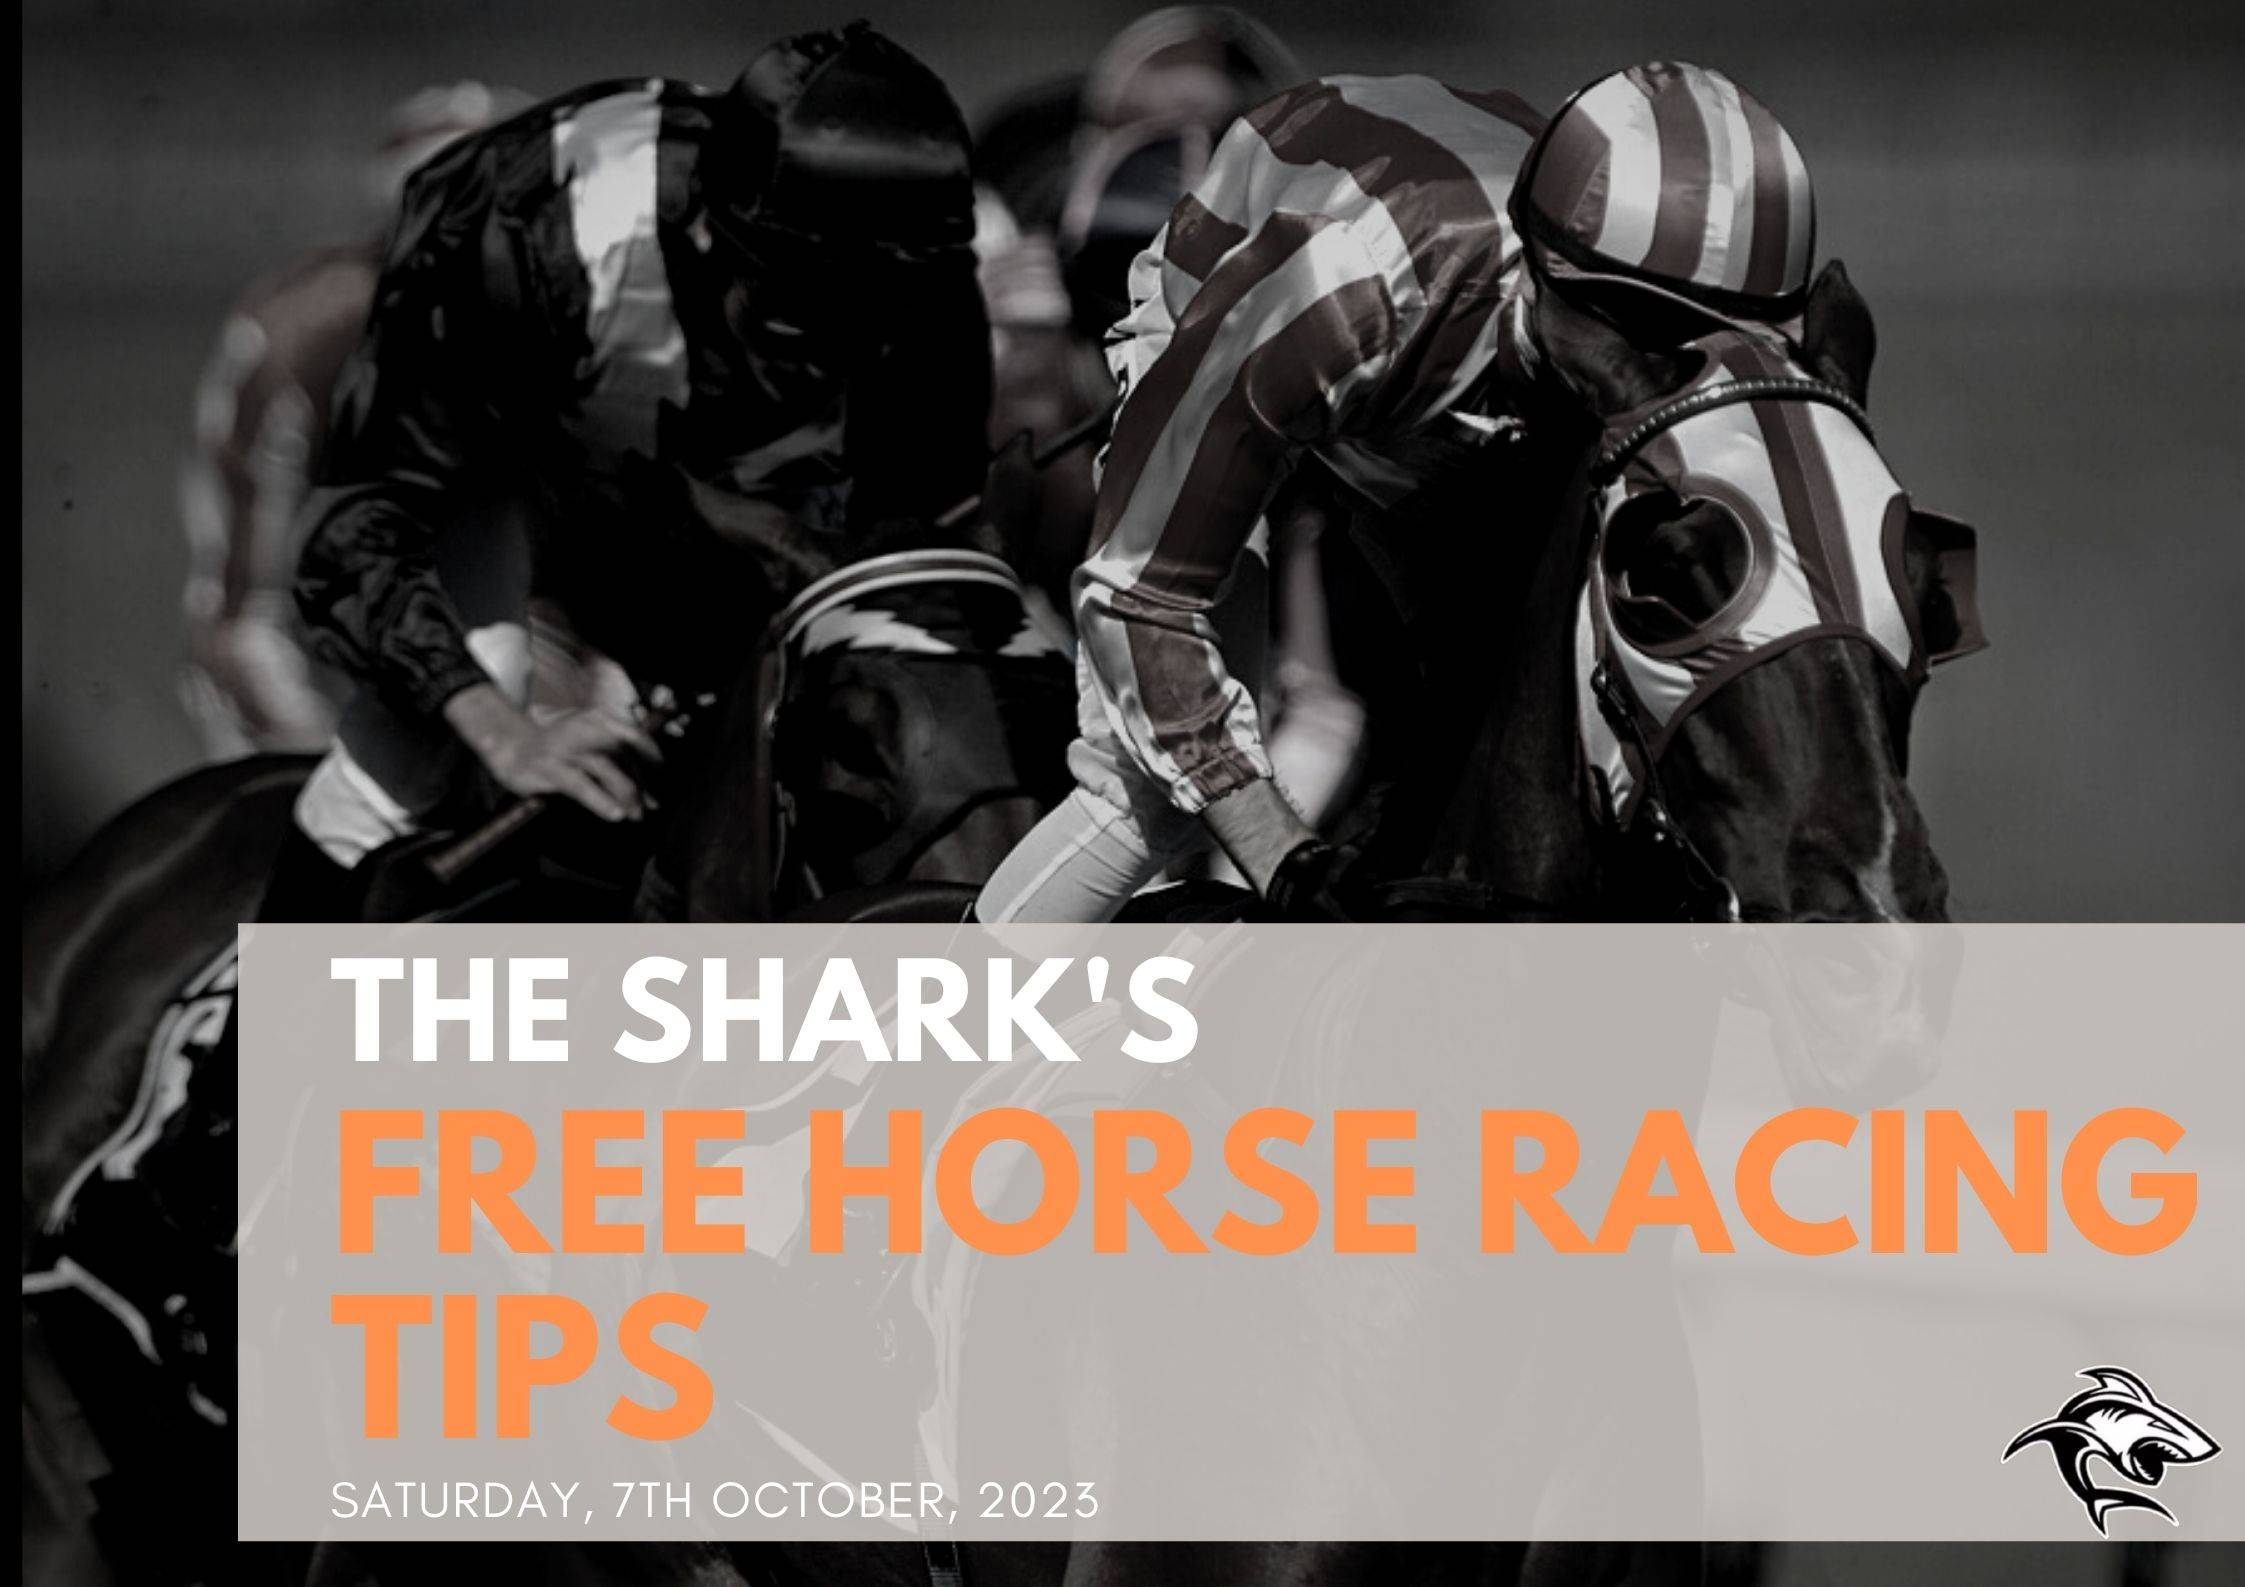 Free Horse Racing Tips - 7th Oct